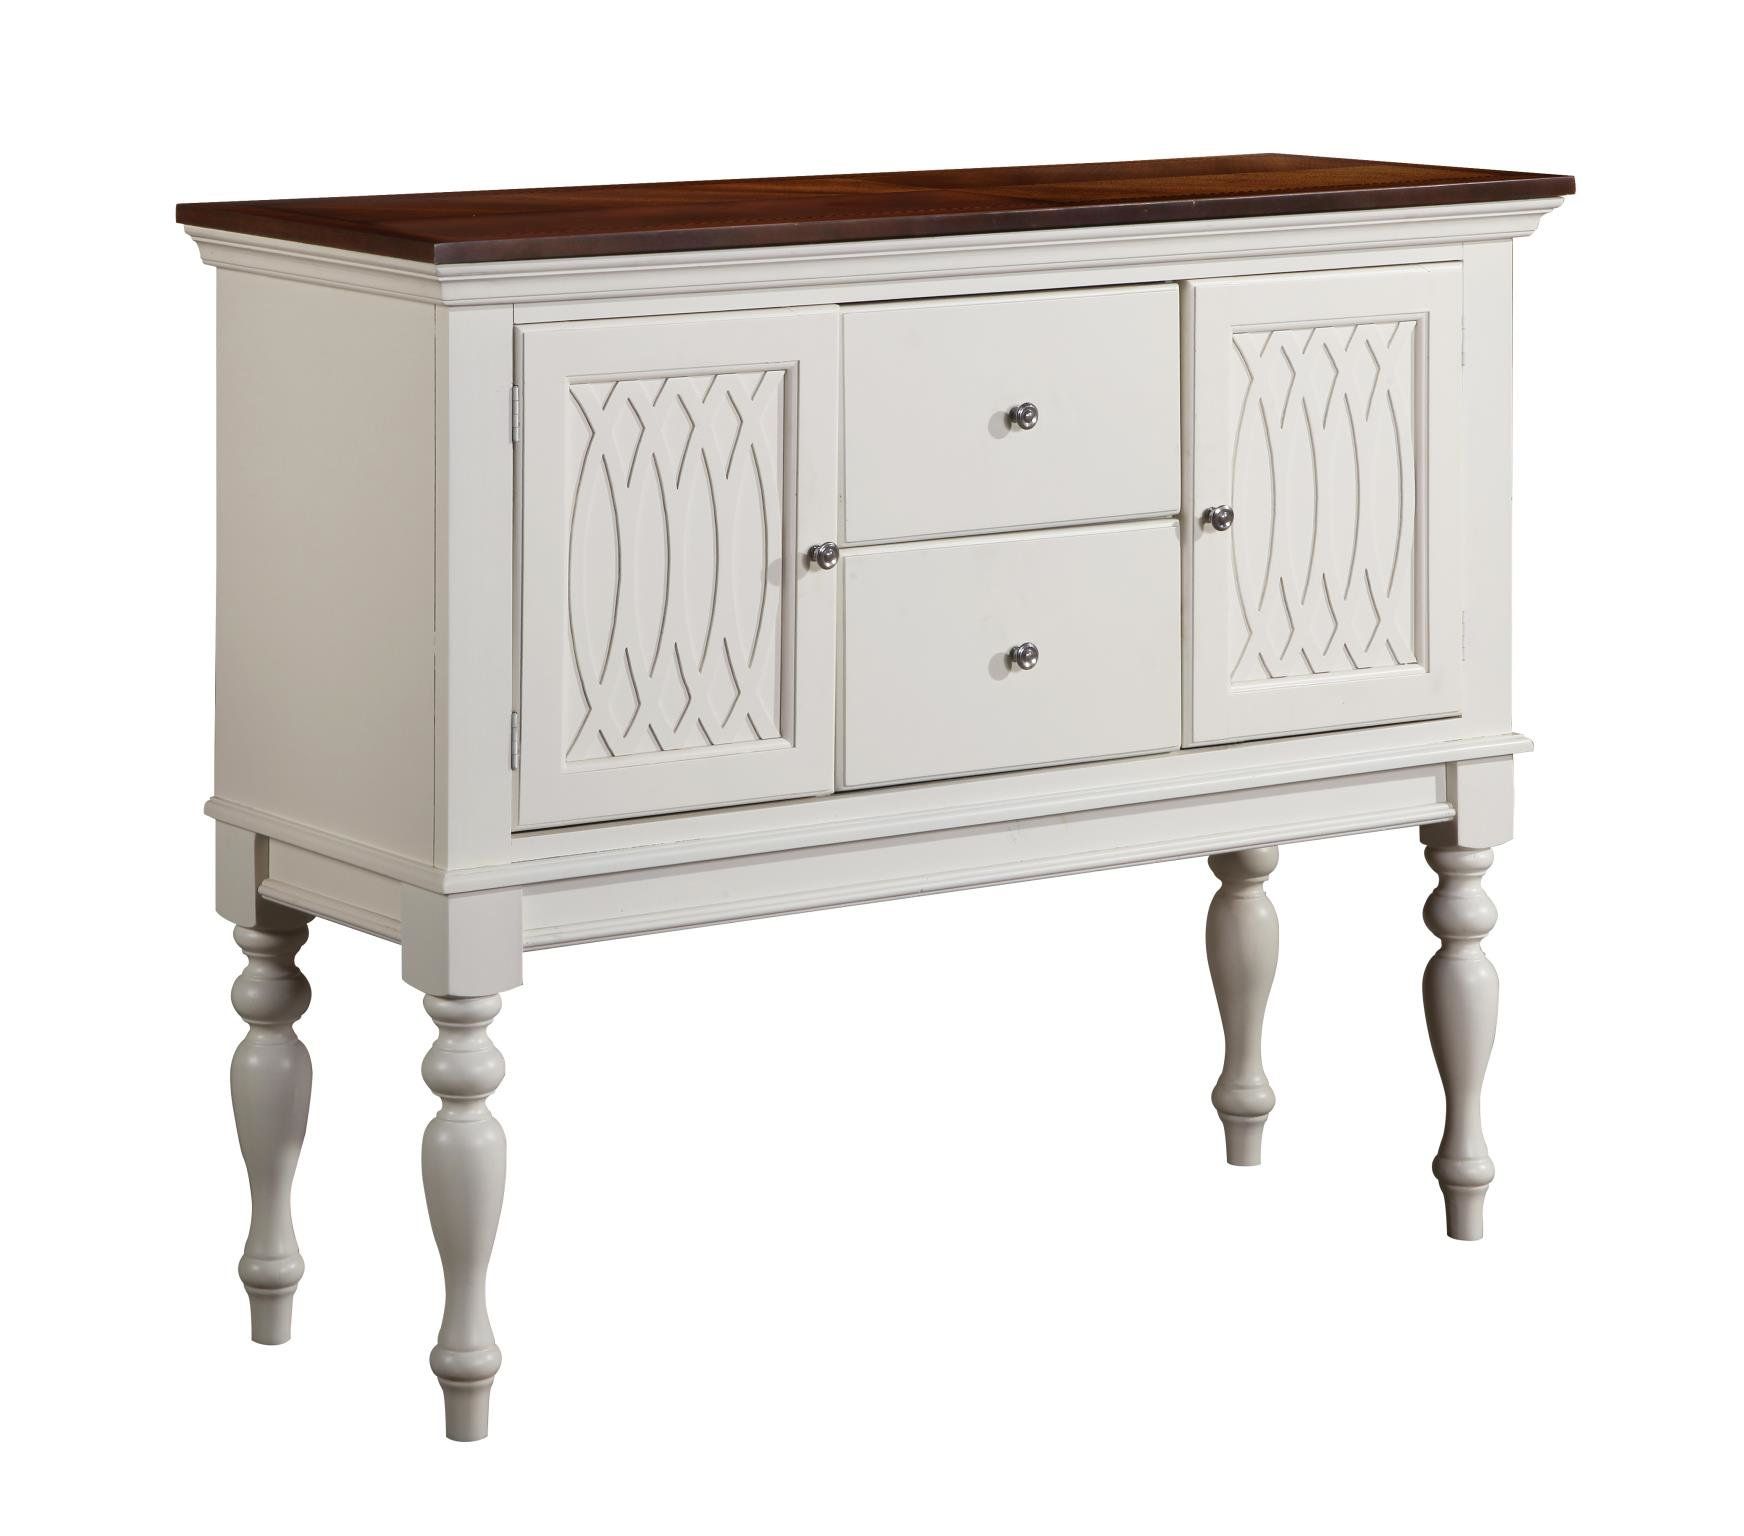 Hillenbrand Upholstered Buffet Table In 2018 Rutledge Sideboards (View 11 of 20)